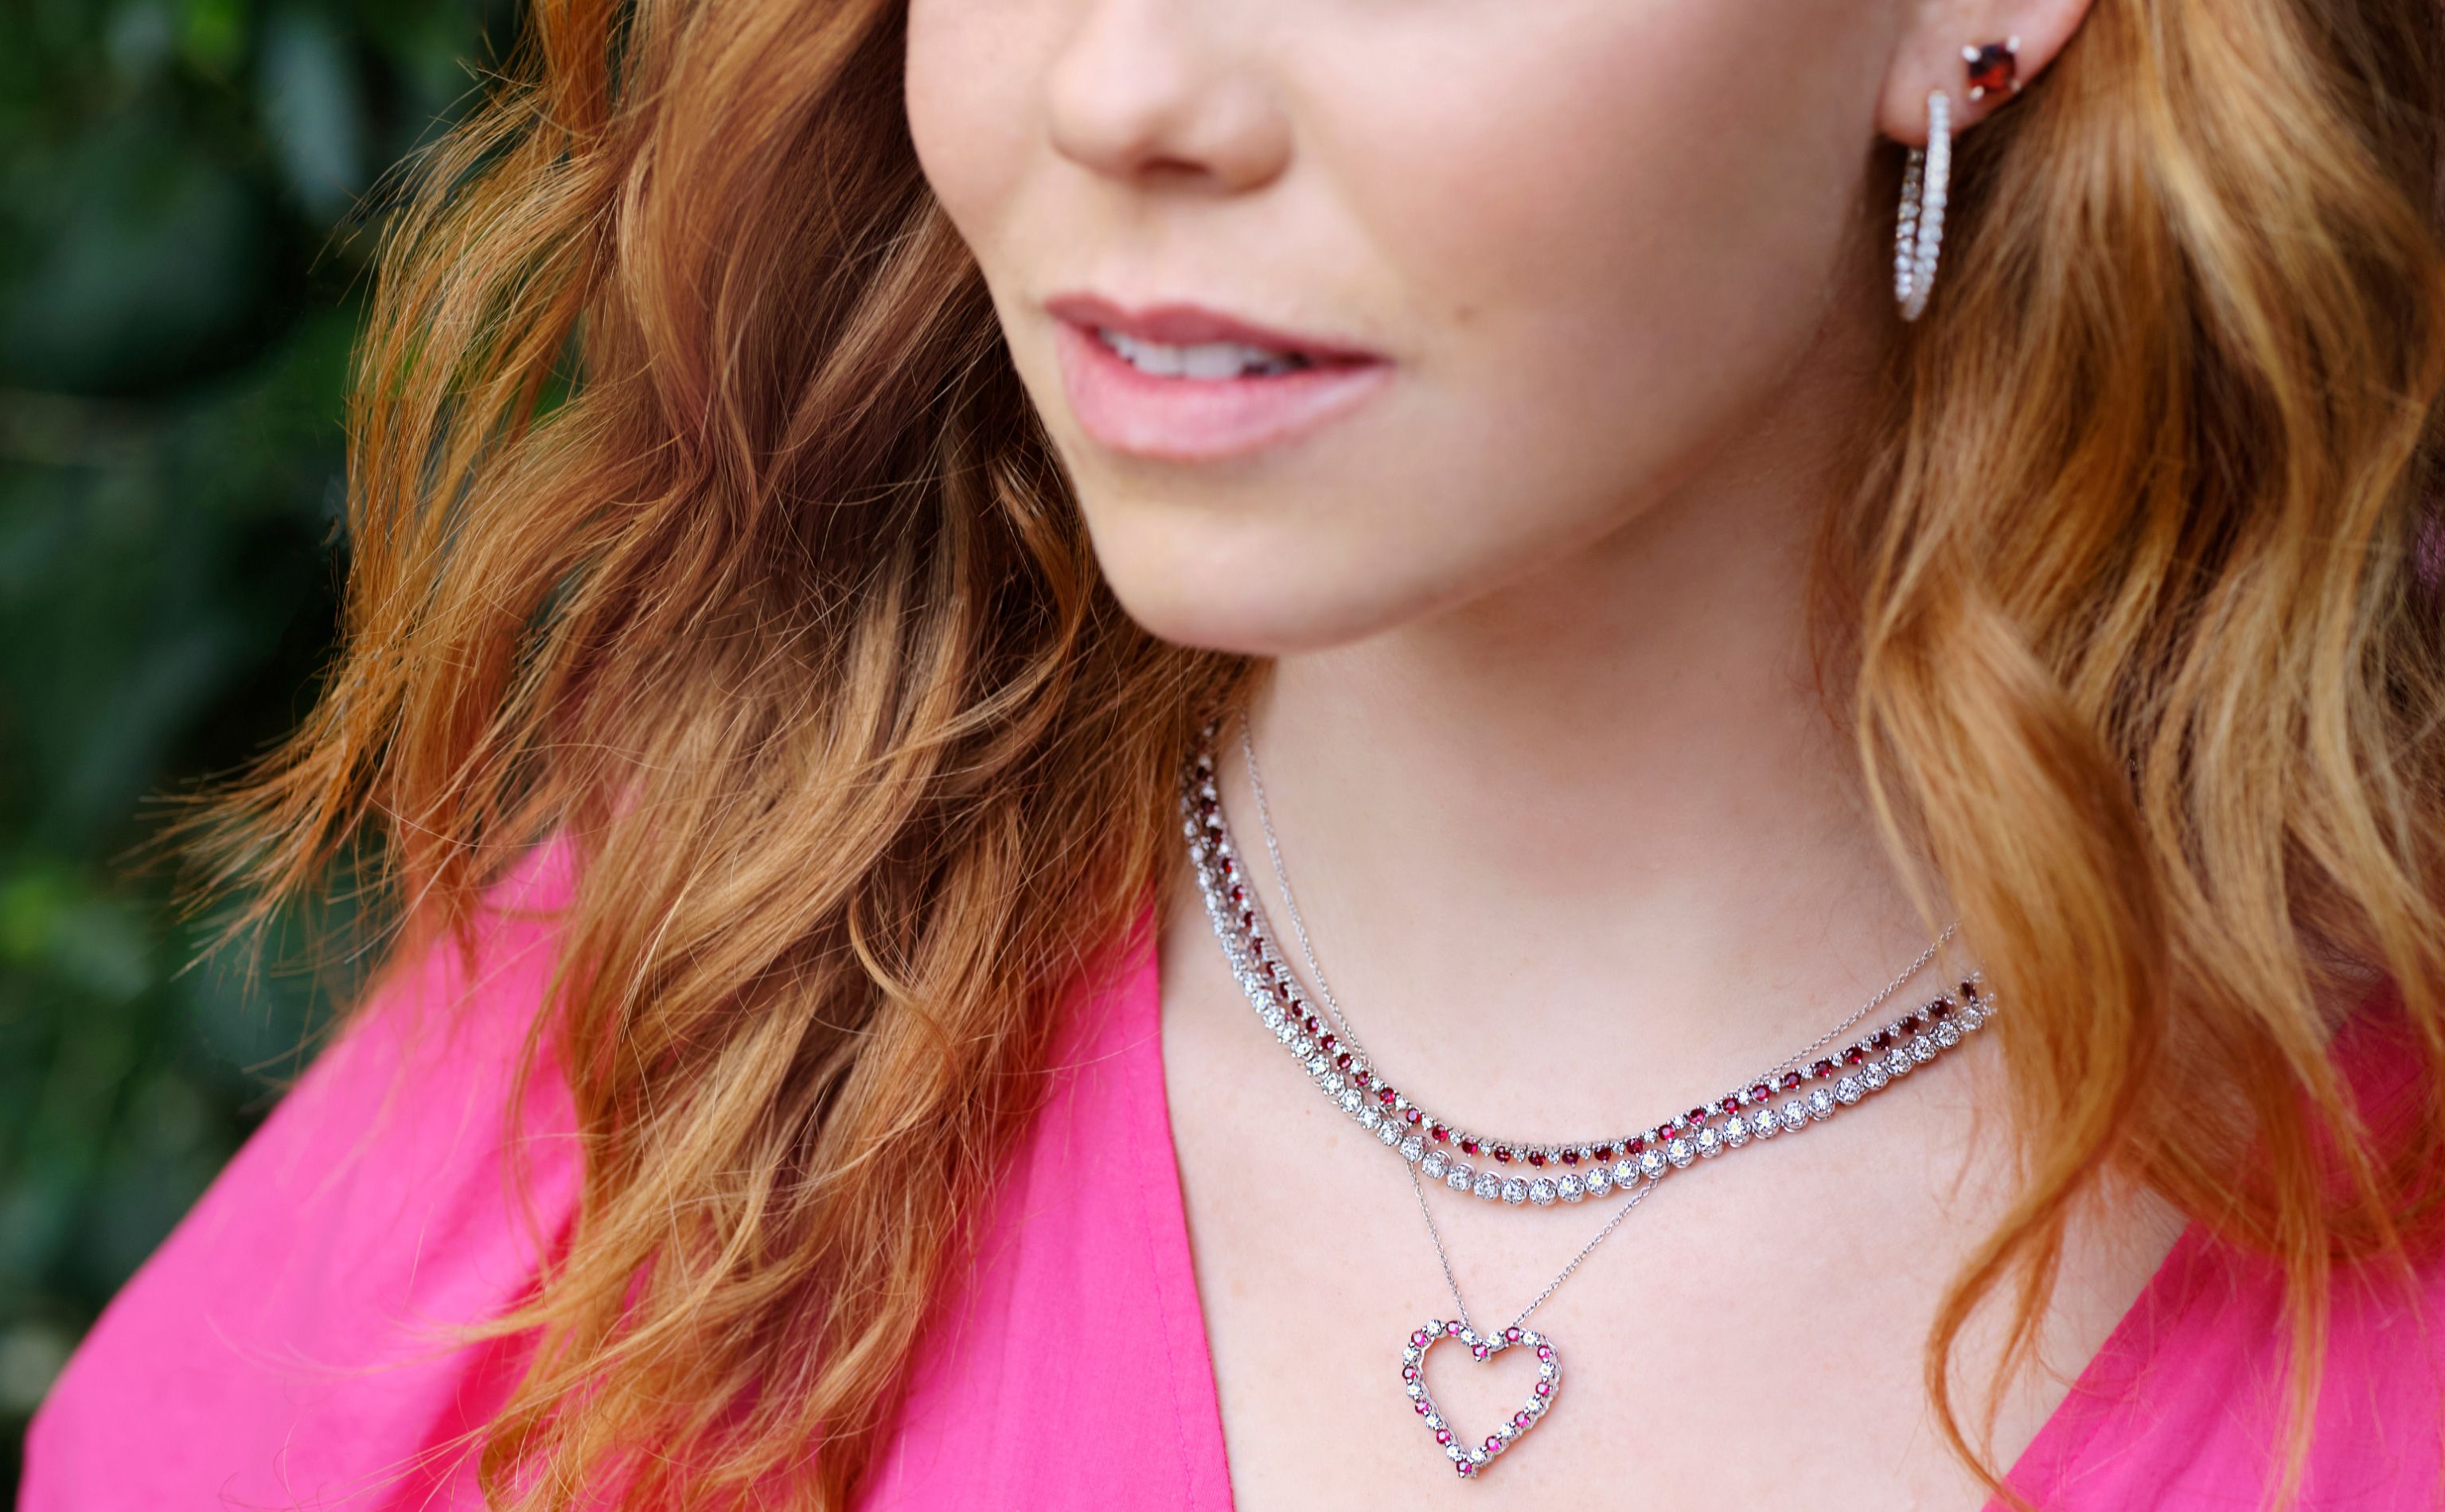 Woman with two eternity necklaces, a heart pendant, and diamond hoop earrings